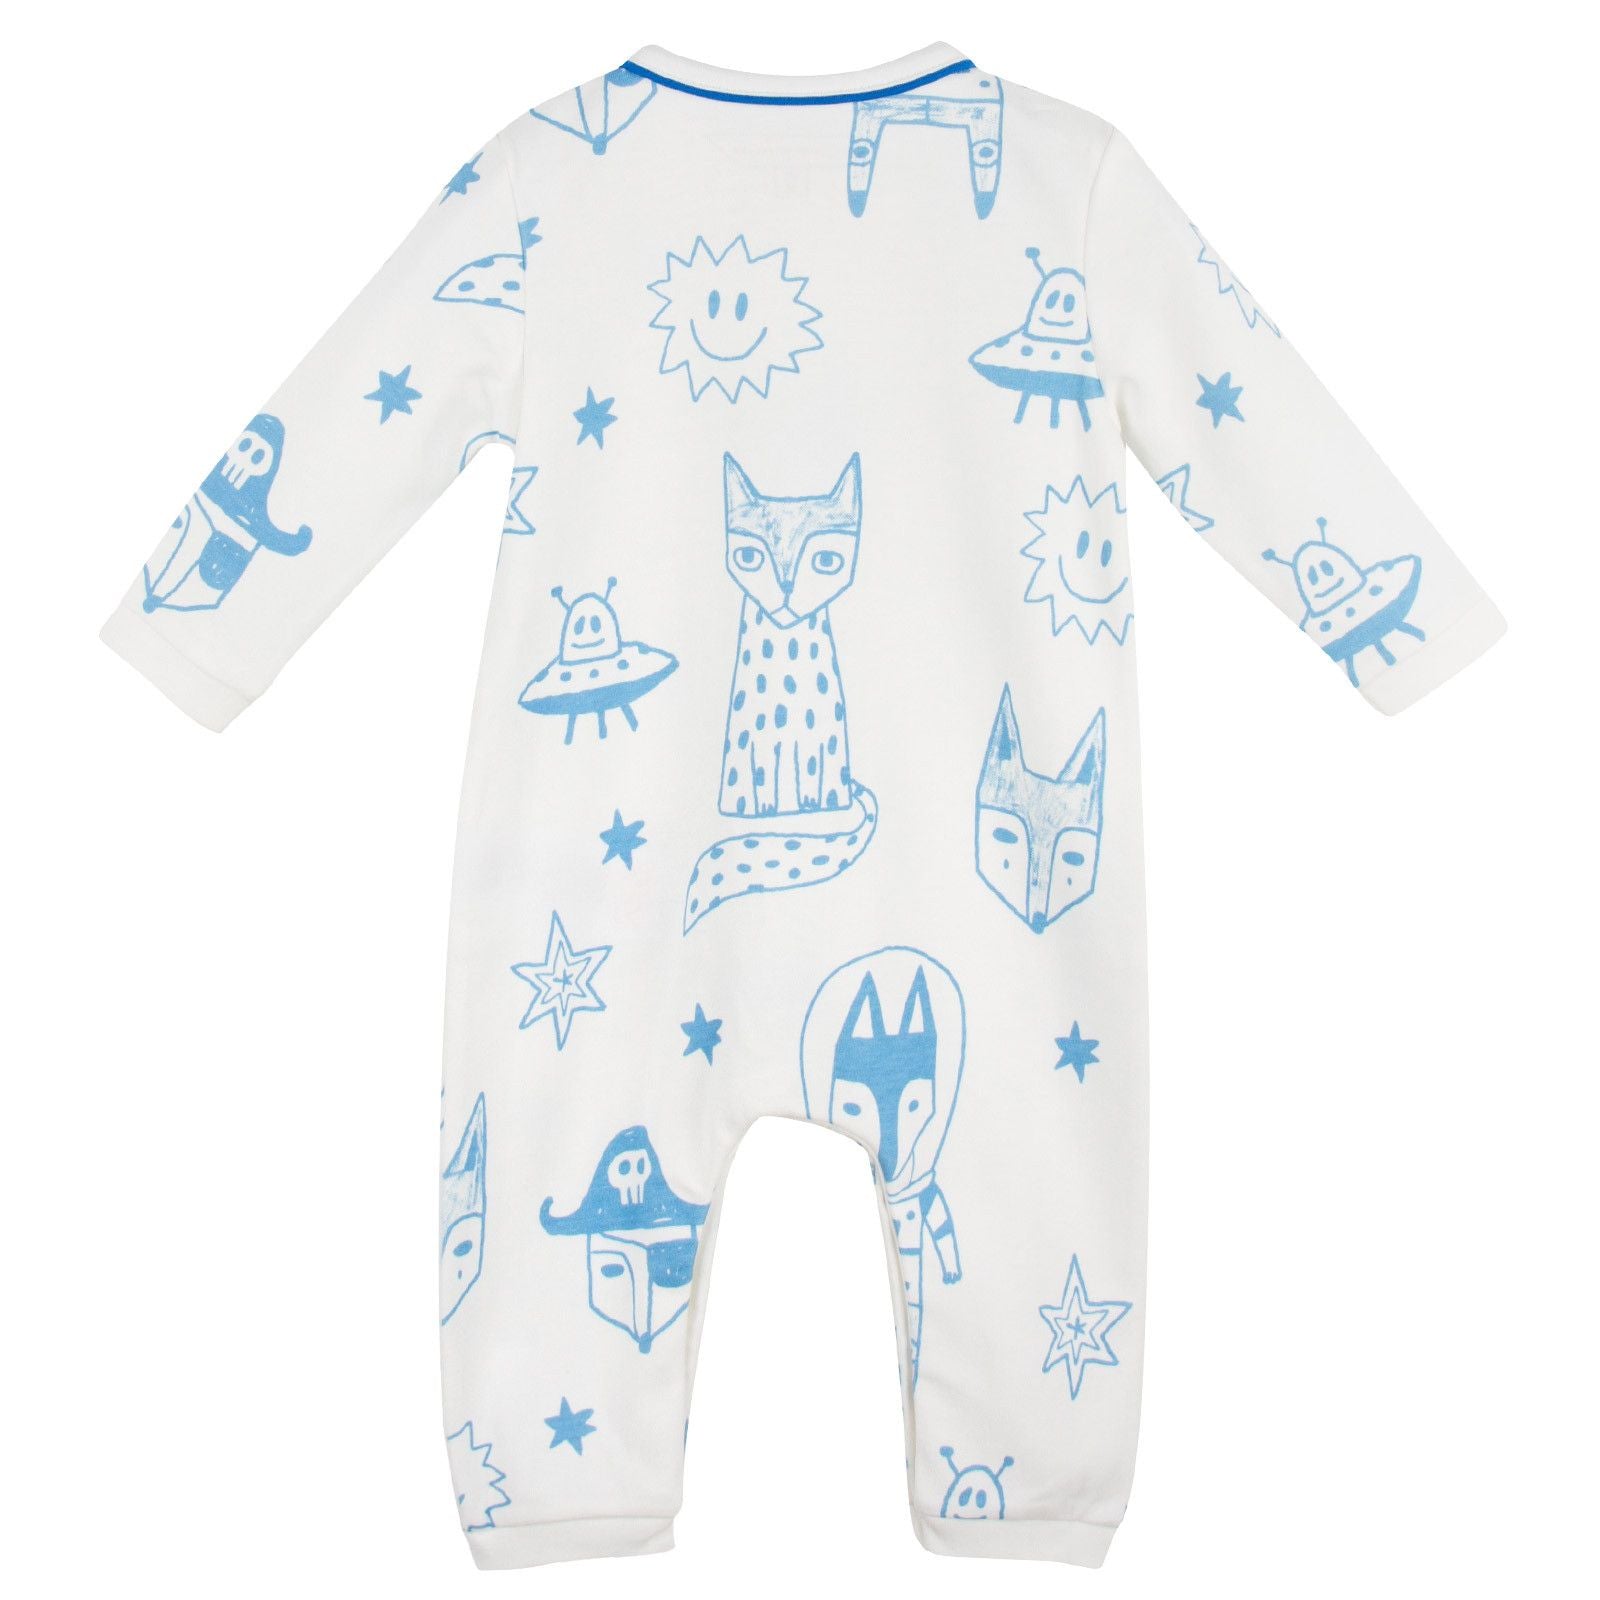 Baby Ivory&Blue Cotton Space Printed Babygrow - CÉMAROSE | Children's Fashion Store - 2